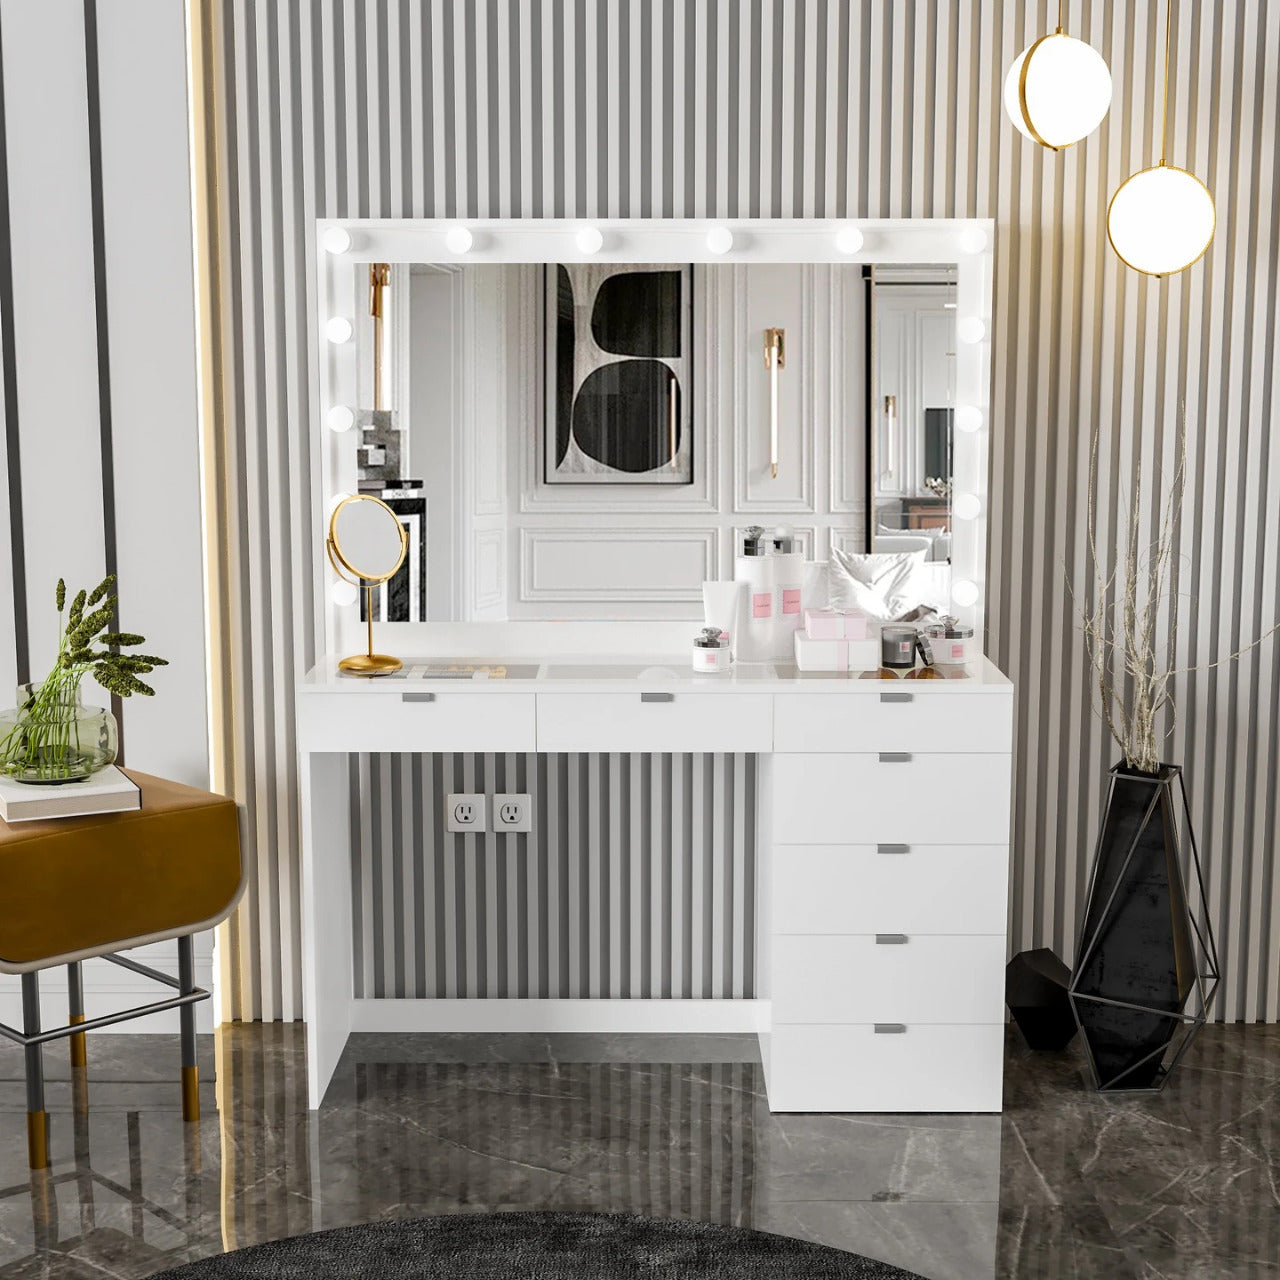 Makeup Vanity: Lighted Vanity with Glass Top  Dressing Table